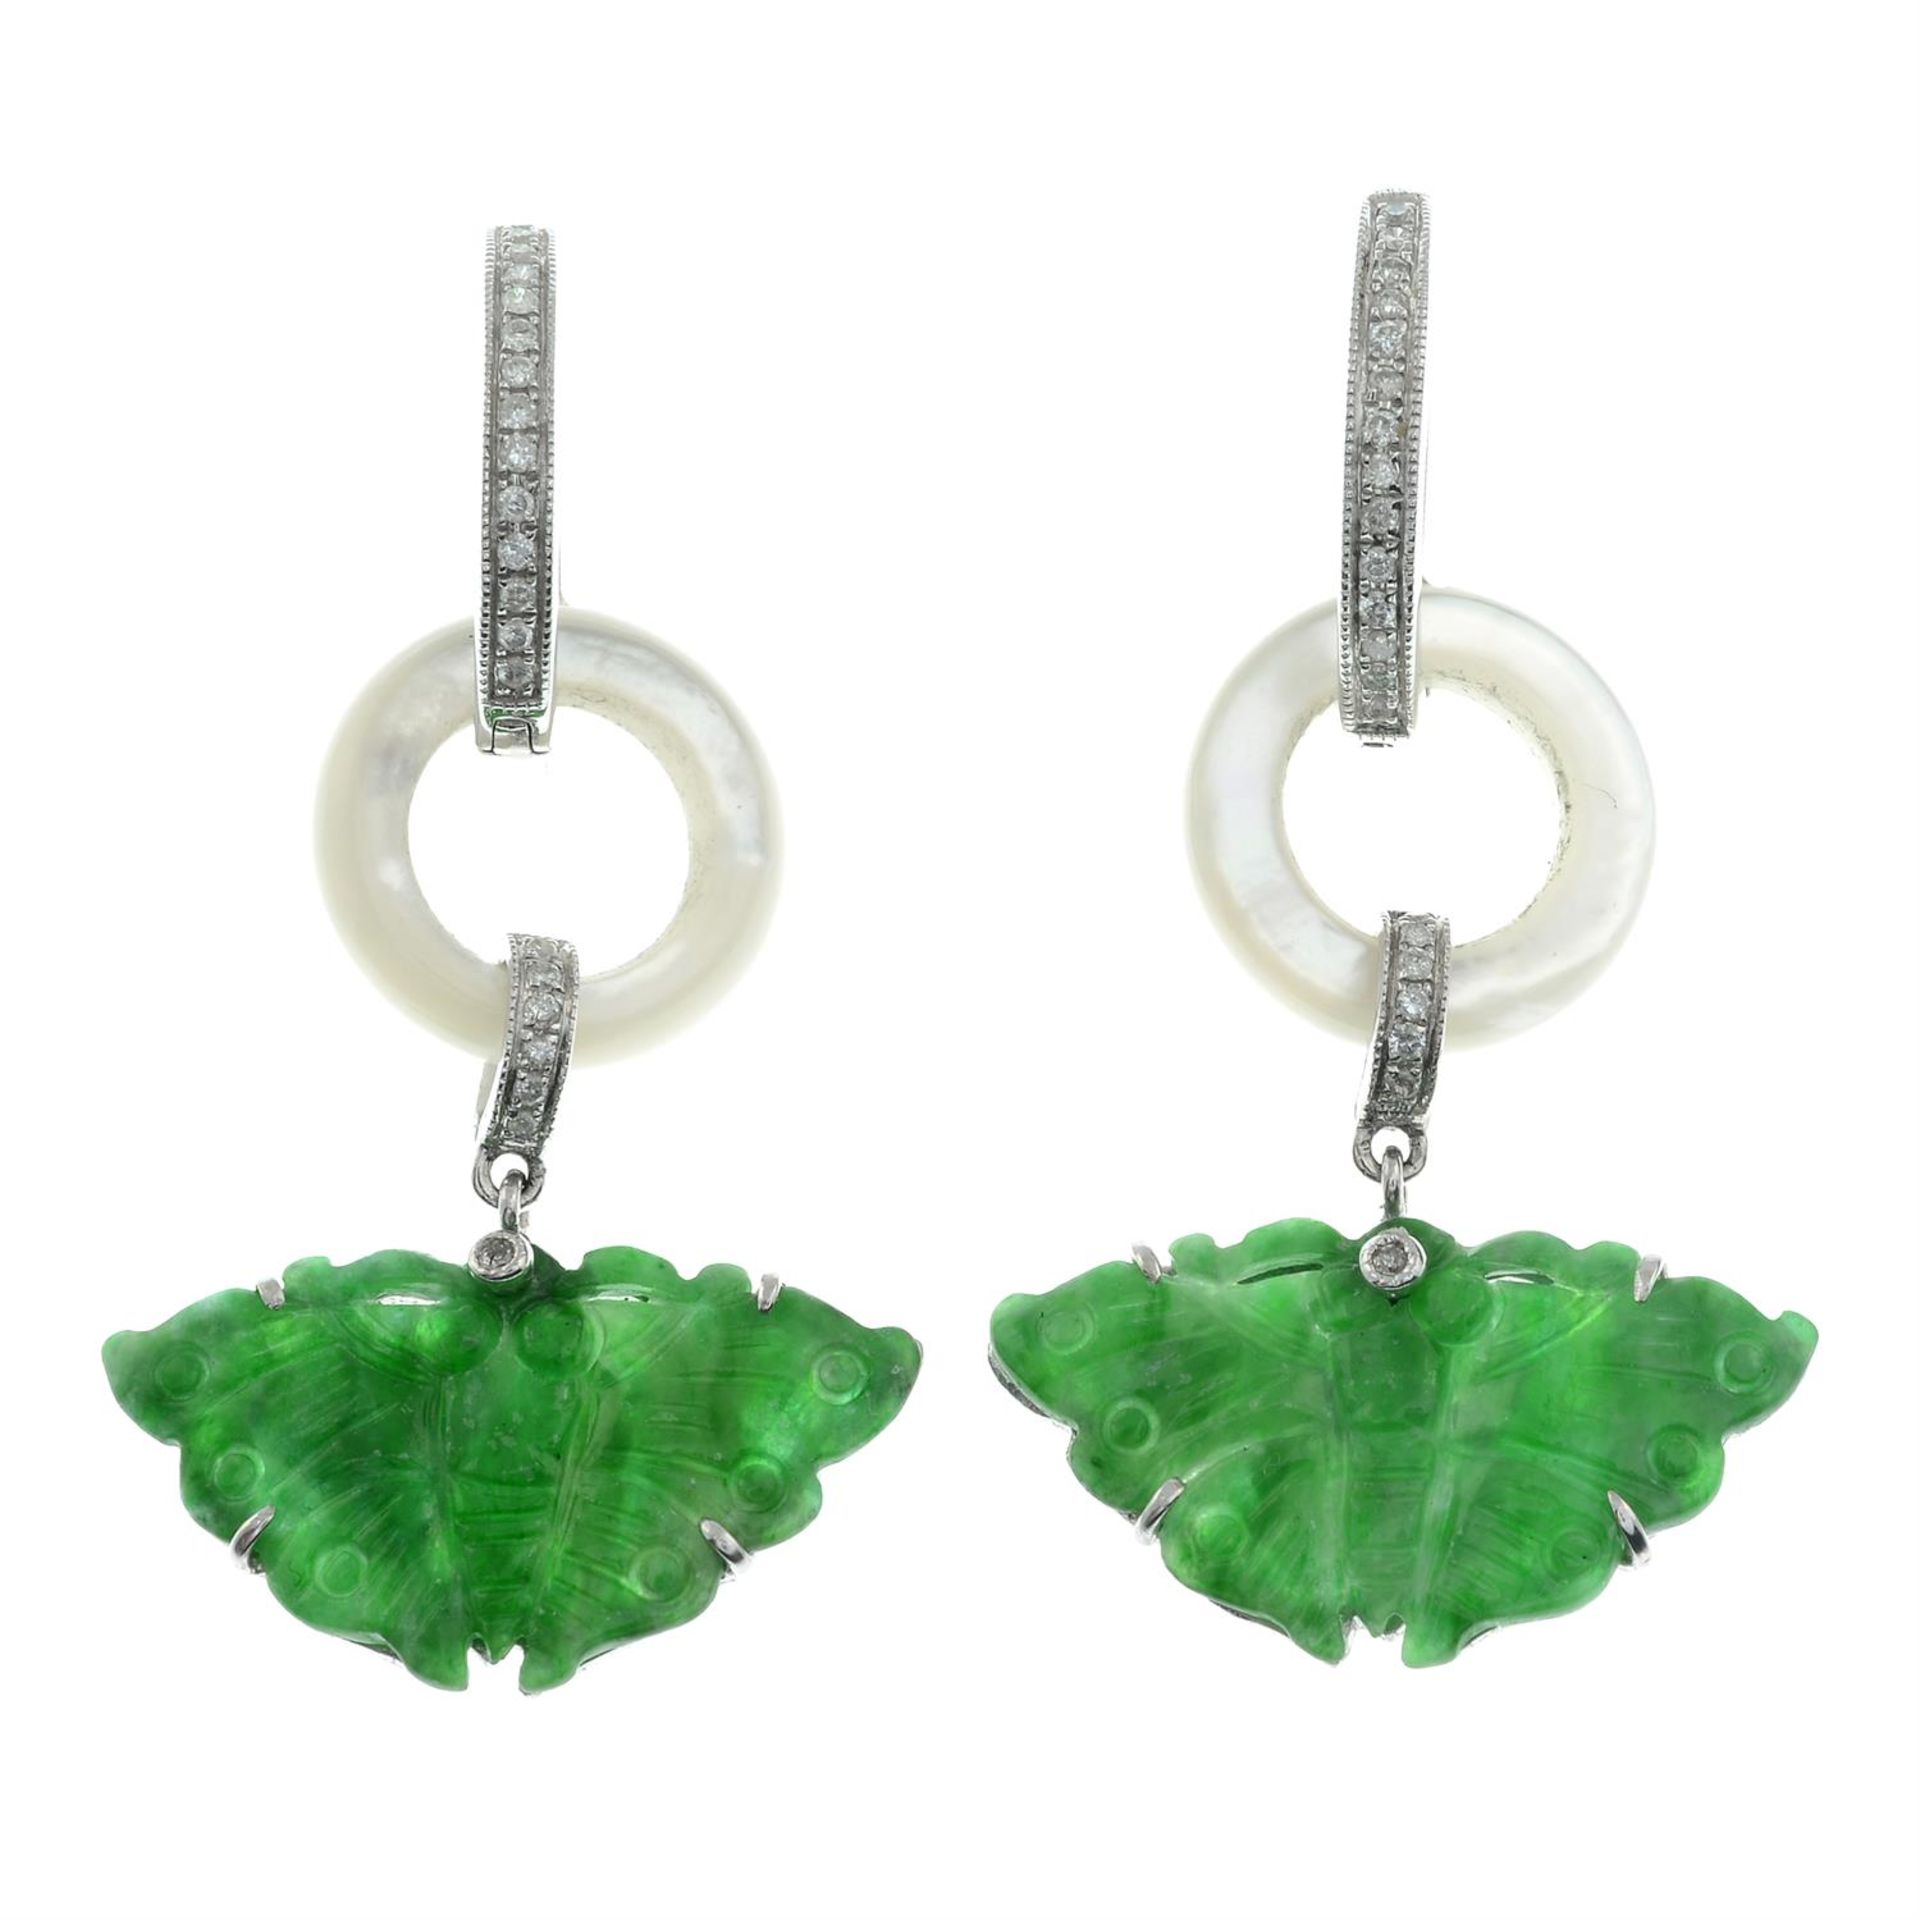 A pair of carved jadeite jade moth earrings, with mother-of-pearl circle 'moon' spacer and - Image 2 of 3